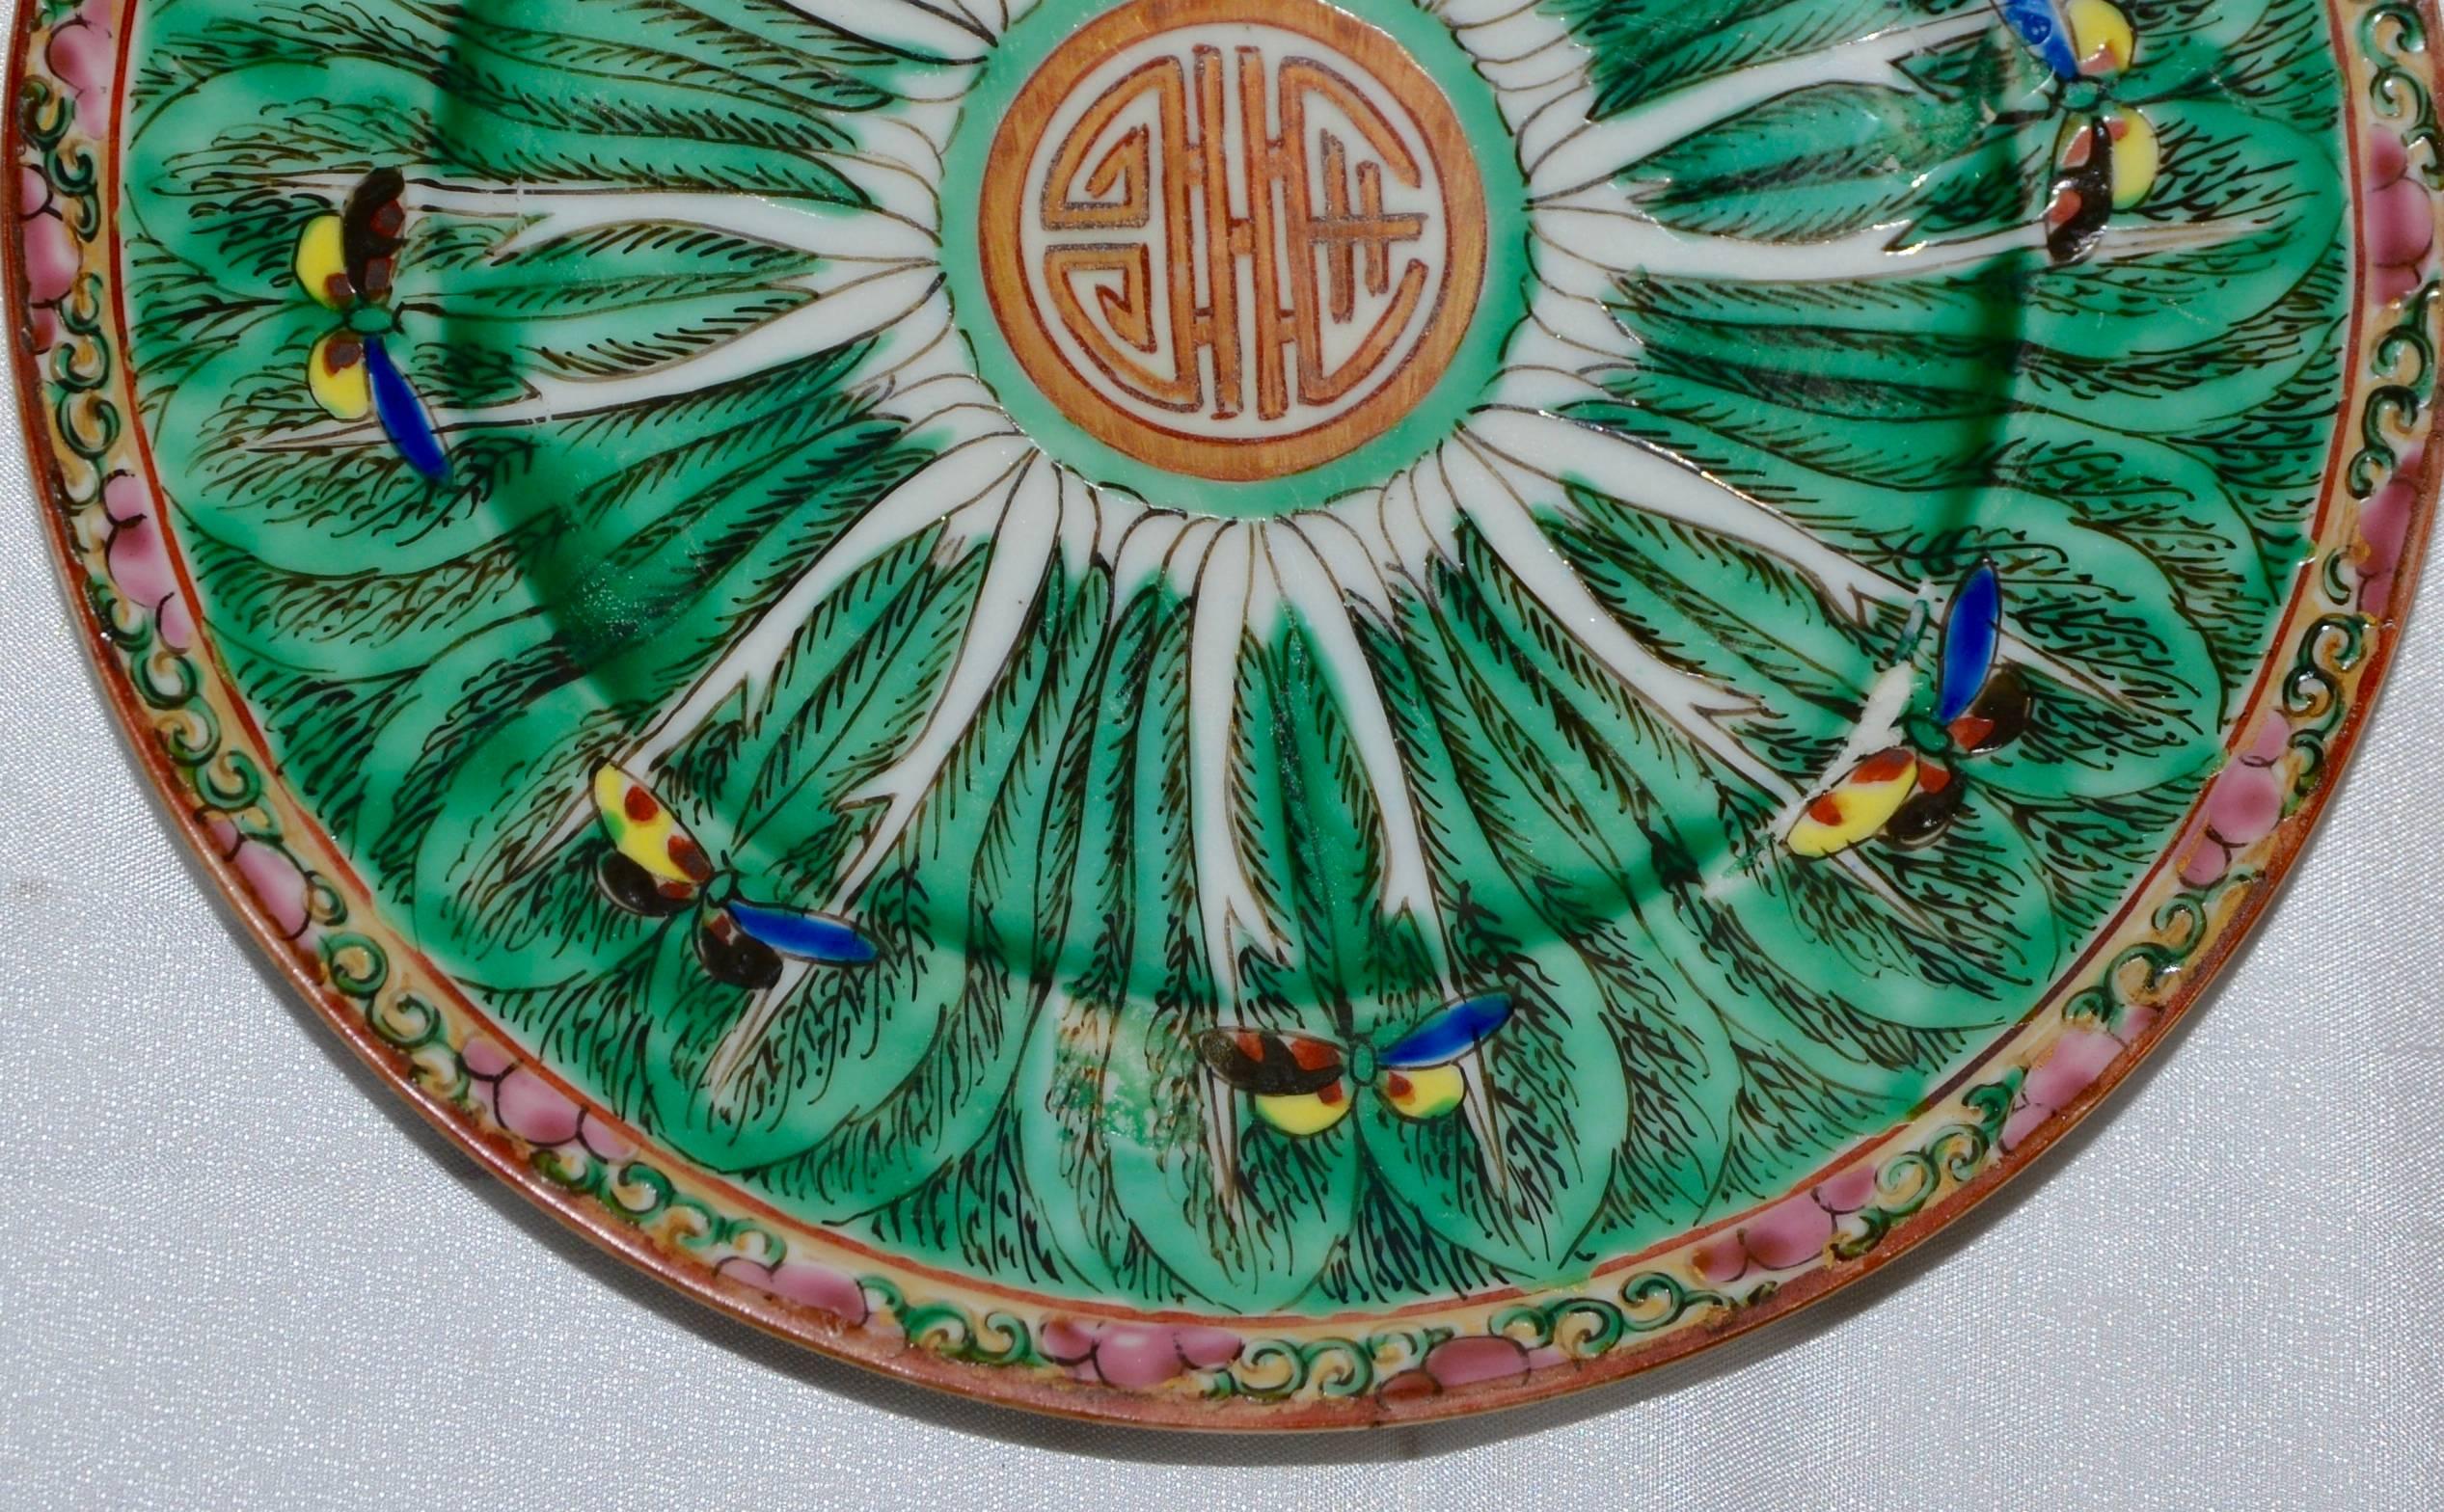 This porcelain plate has been hand painted with cabbage leaves and butterfly's floating about. The edge has a swirled border on the edge. The plate is not marked.